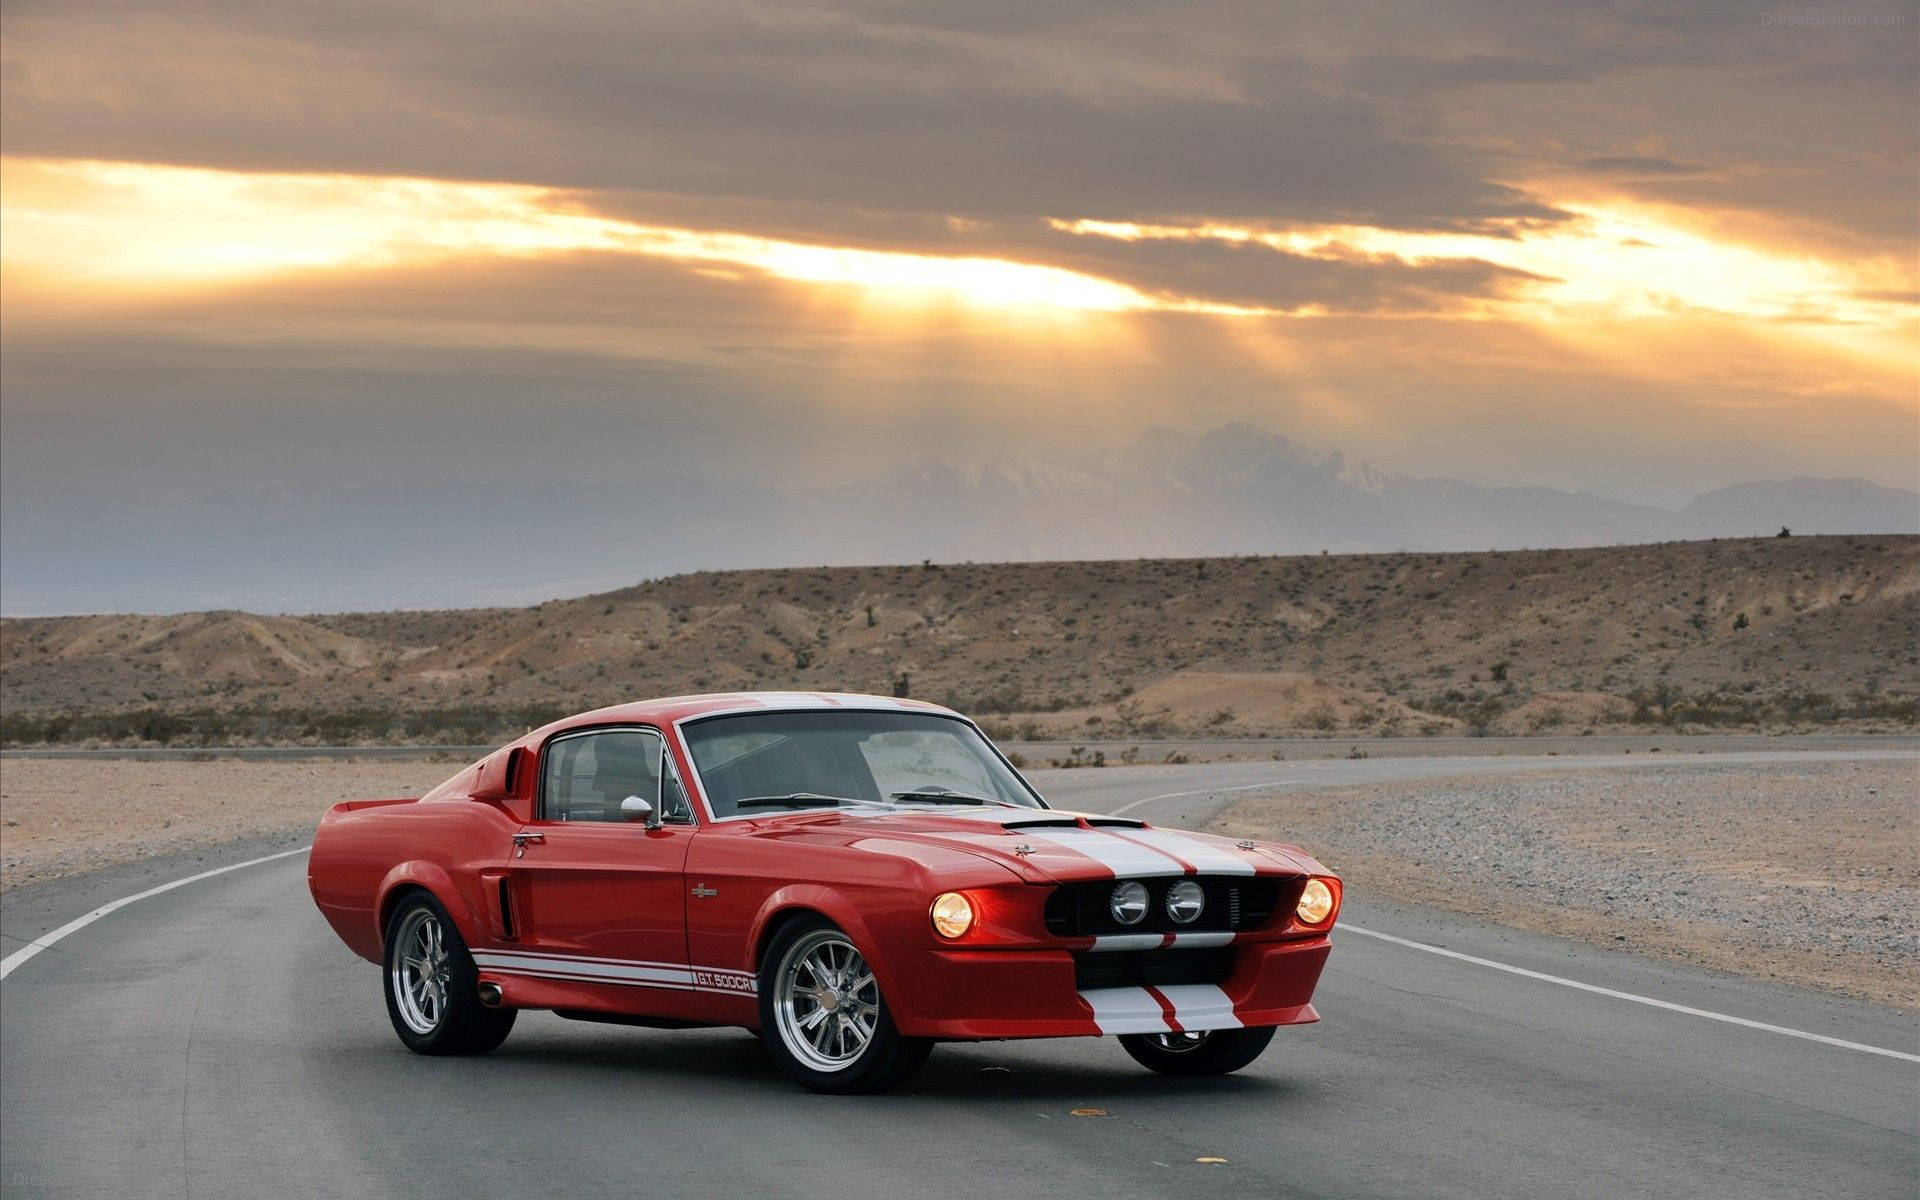 Marlboro Red Shelby Mustang Background